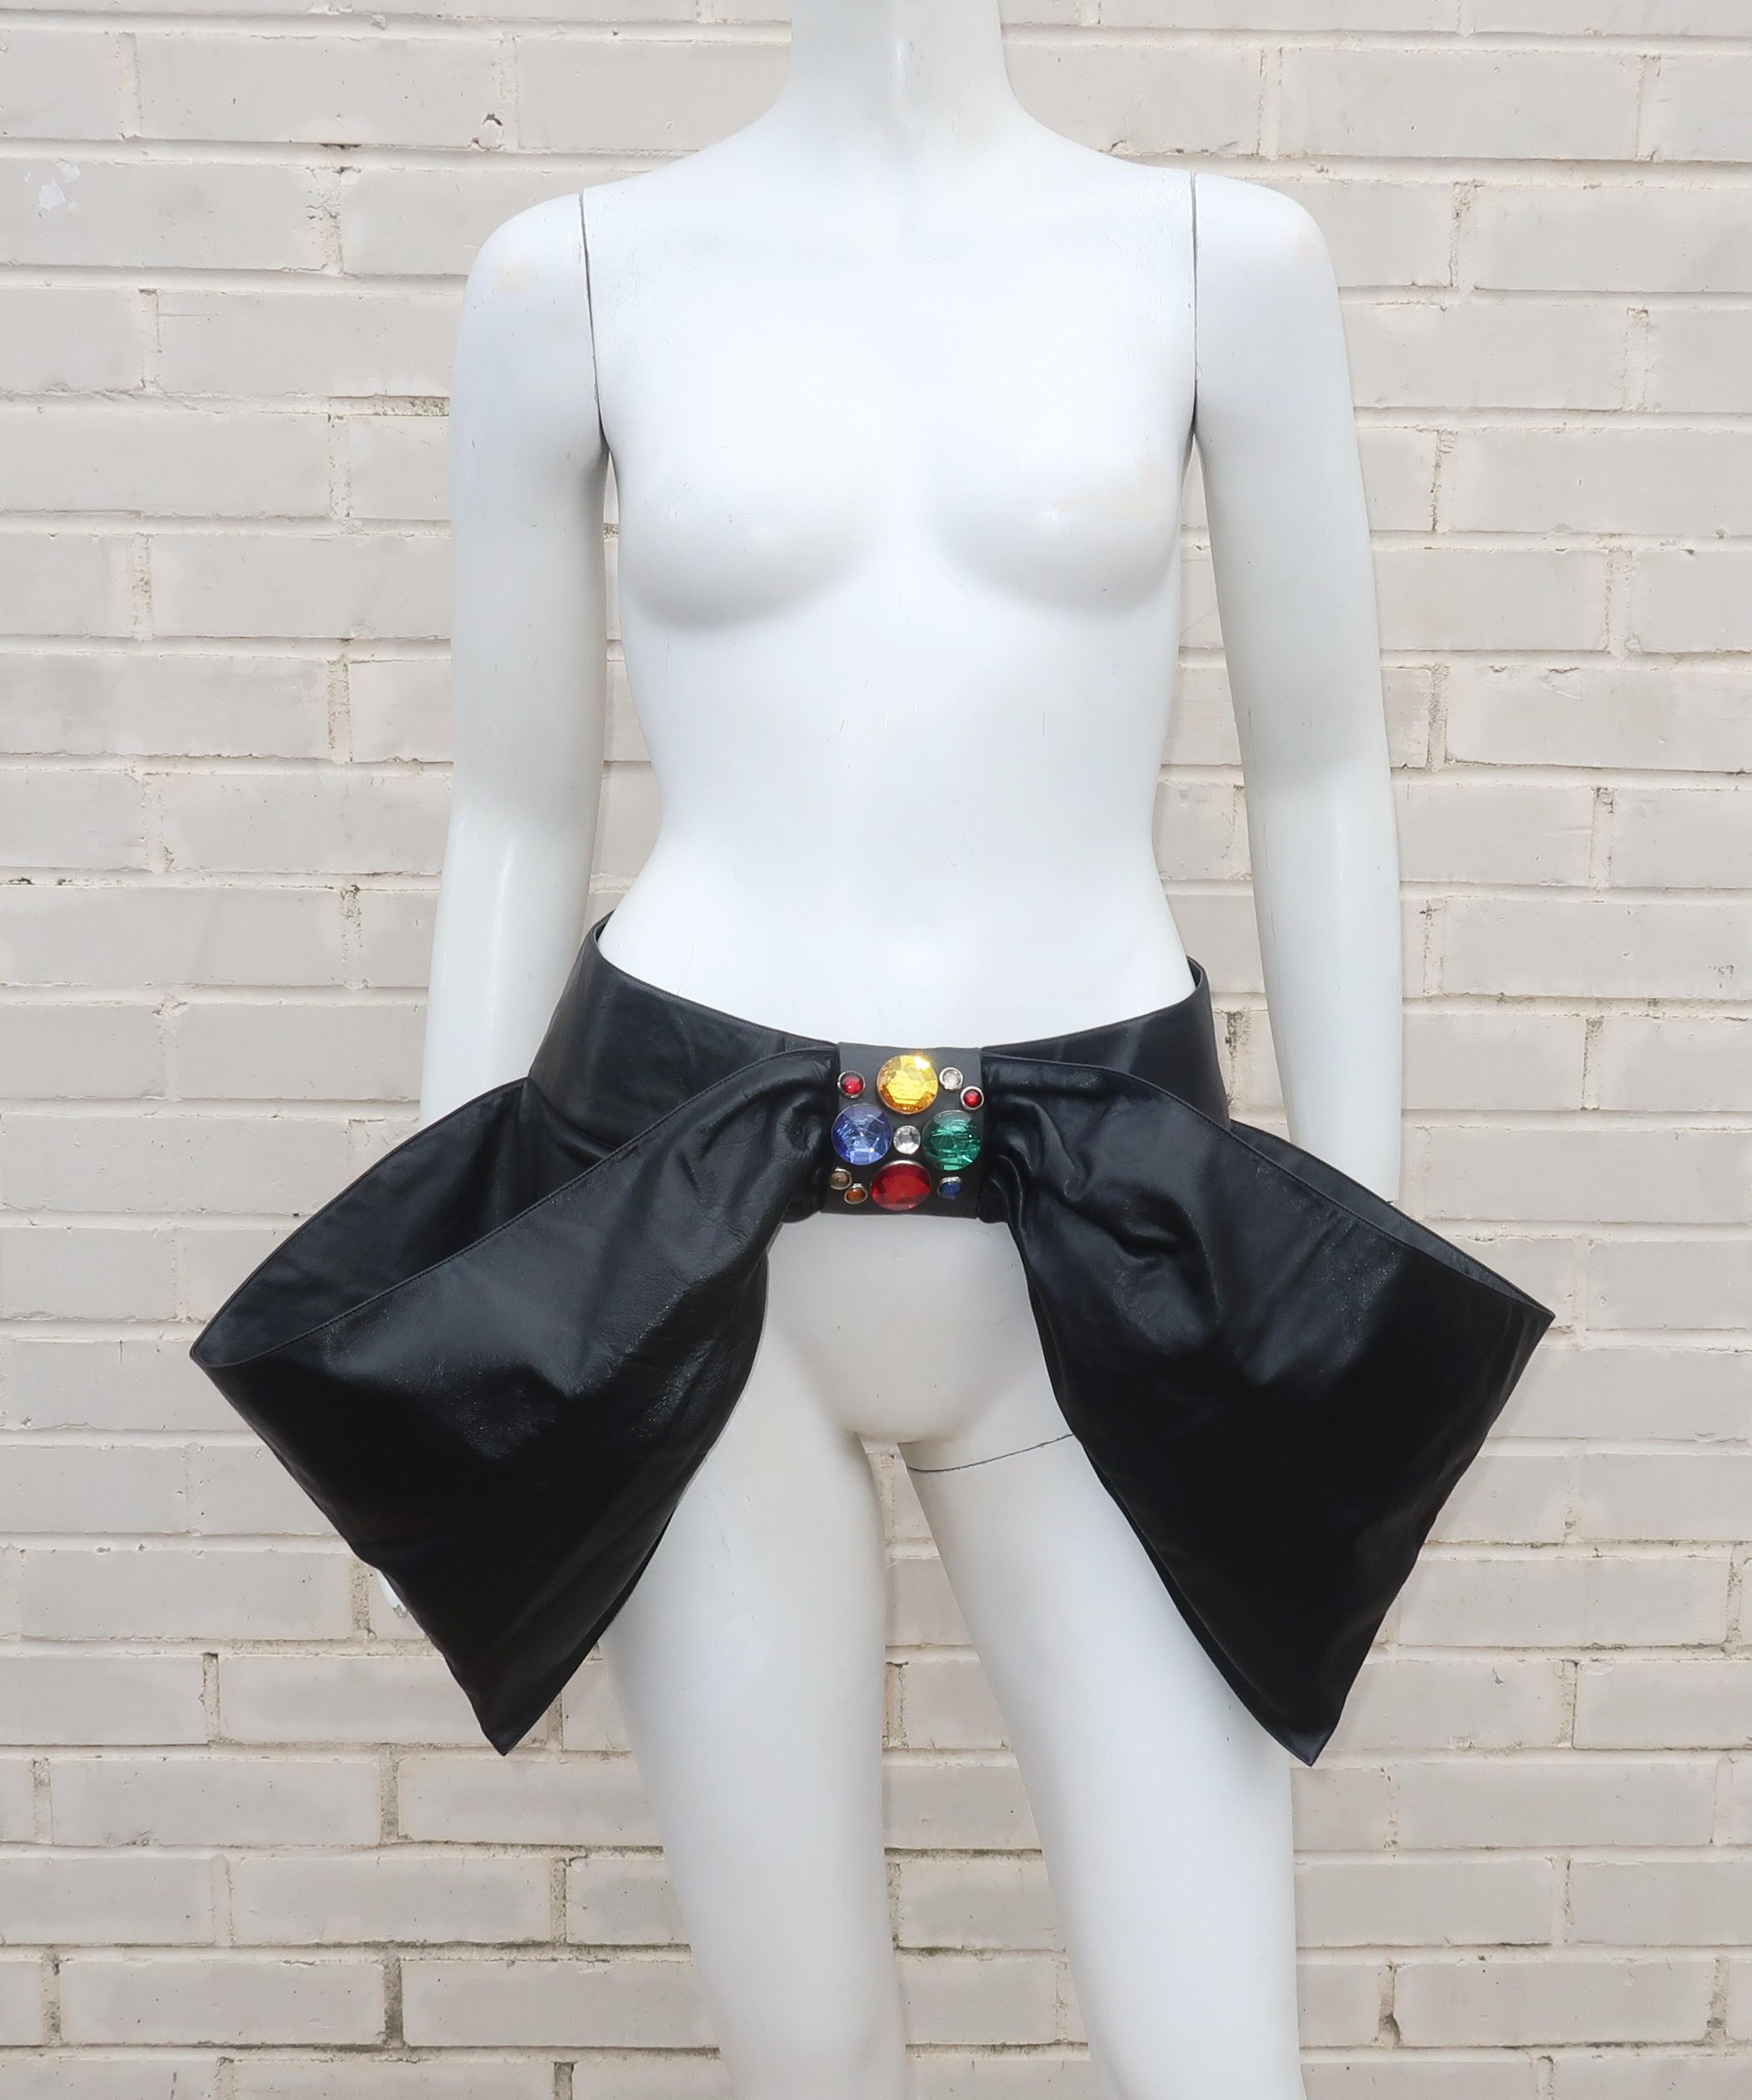 Tie your ensemble up with a big fabulous bejeweled black leather bow belt by Charles Jourdan.  Describing this piece as a belt may be an understatement as it commands attention both in size and detail.  It is designed to sit at the top of the hips